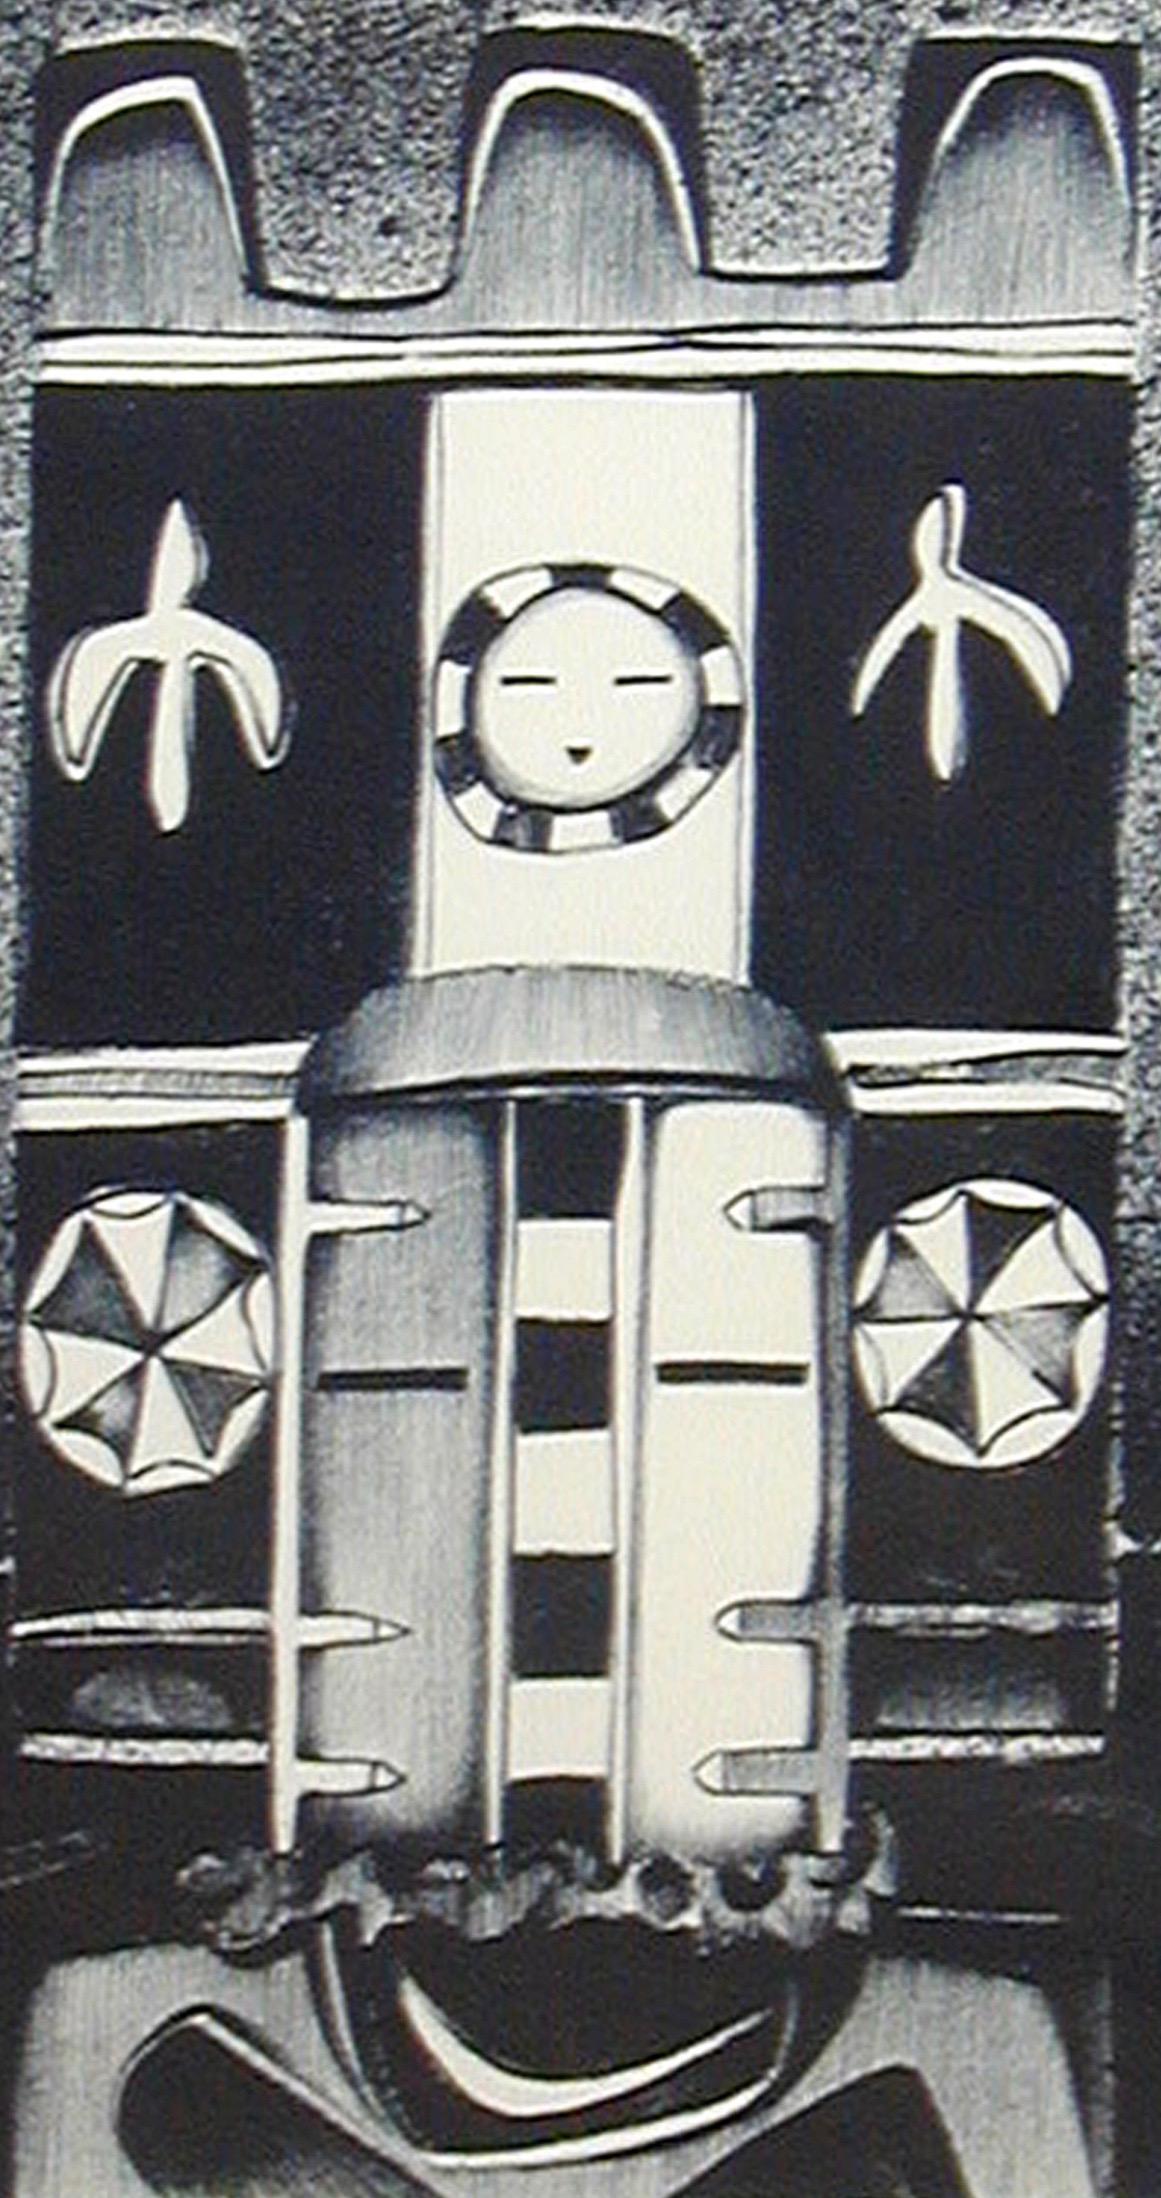 Hemis Figure by Dan Namingha Hopi kachina katsina black and white lithograph ed

unframed hand pulled at Tamarind Institute  limited edition lithograph 

Glenn Green Galleries also presents paintings, prints and sculpture by Southwestern luminary,